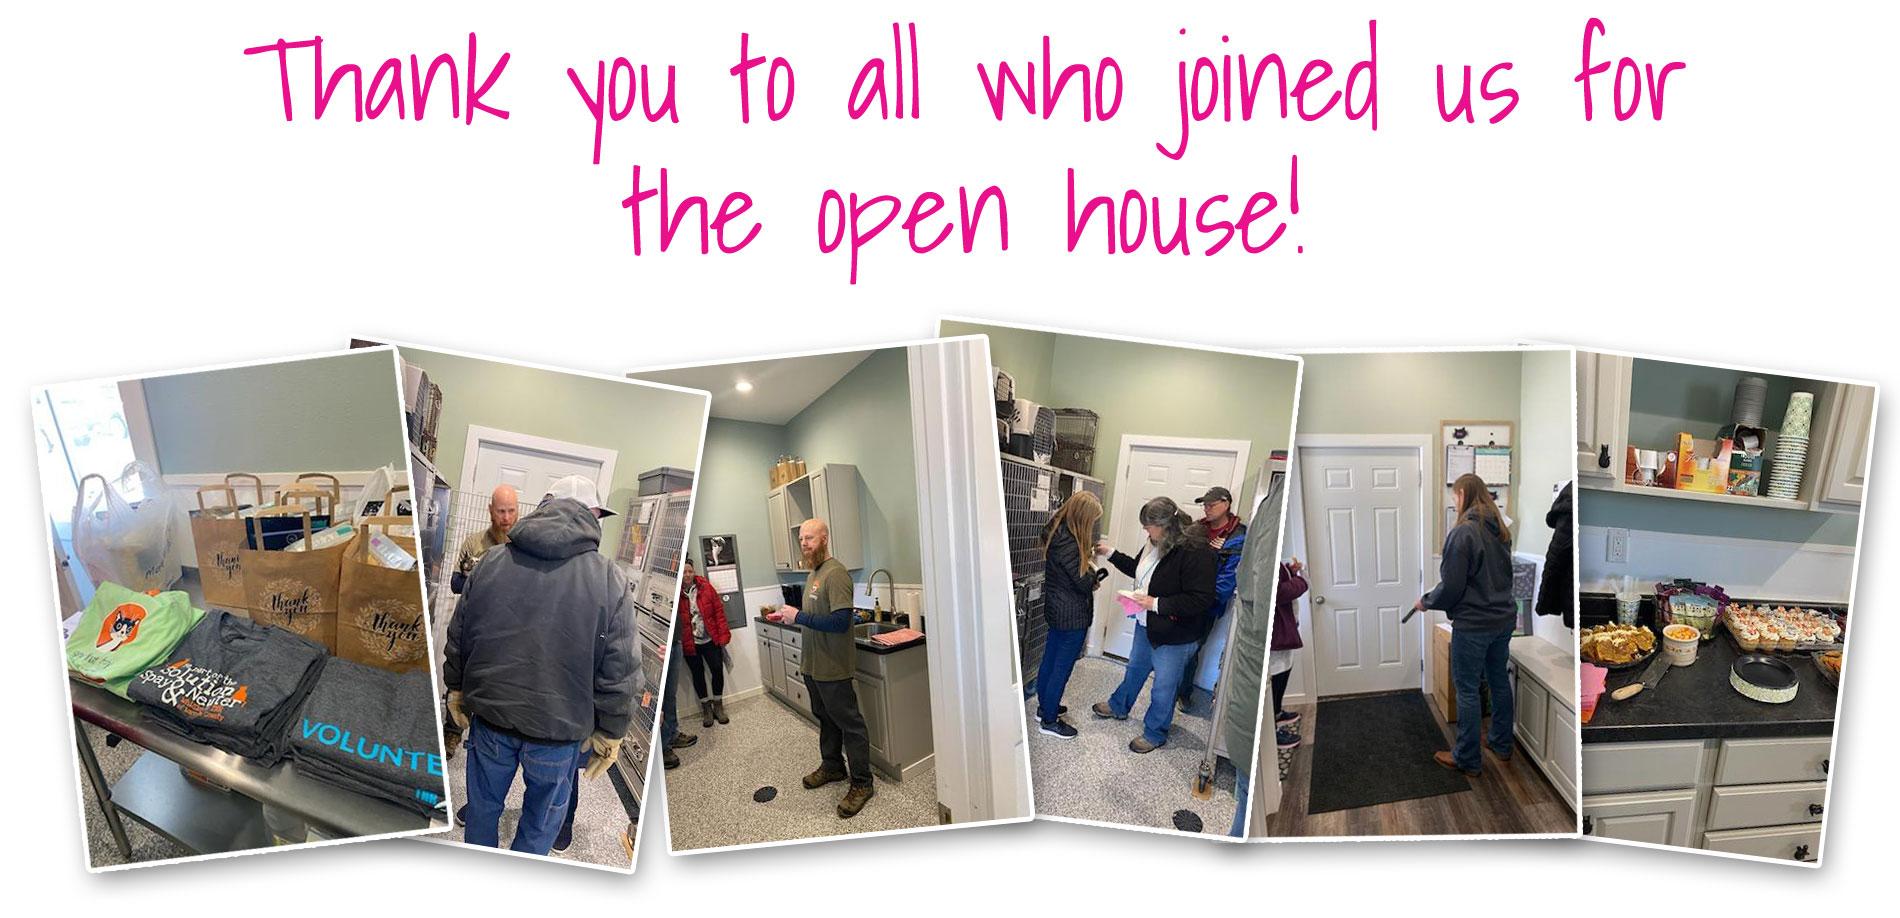 Thank you to all who joined us for the open house!